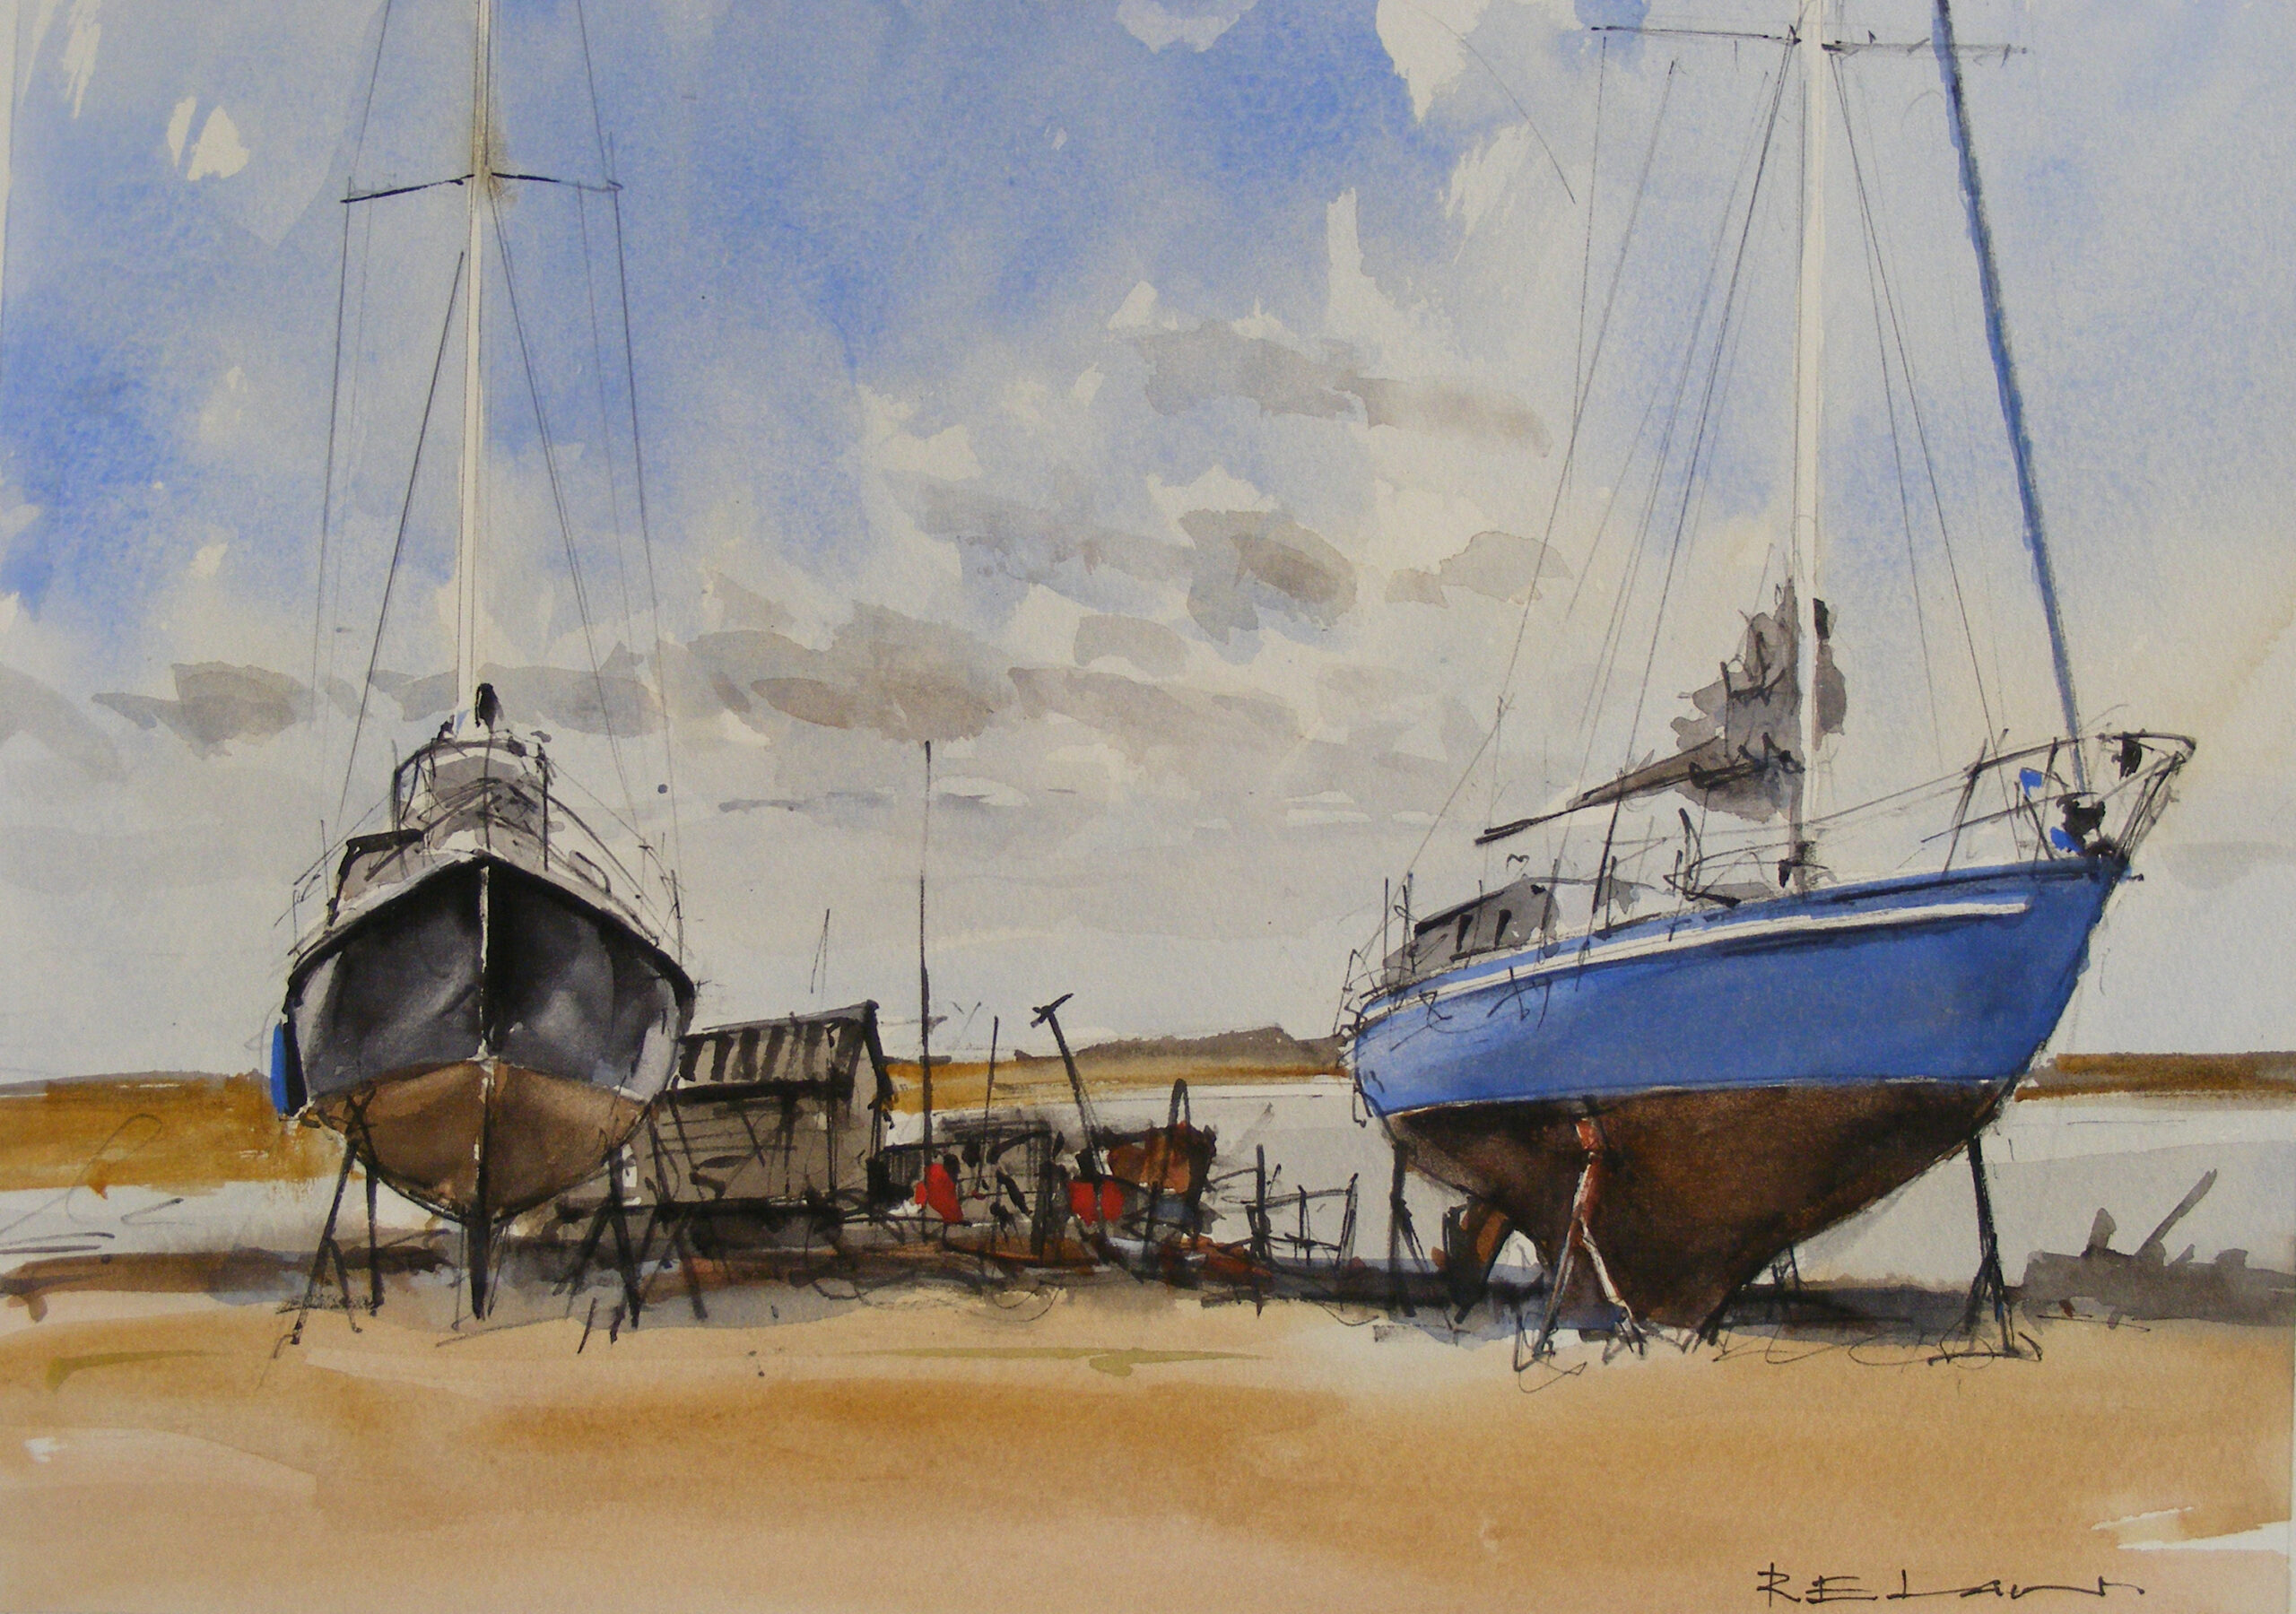 Painting of boats on struts on a beach